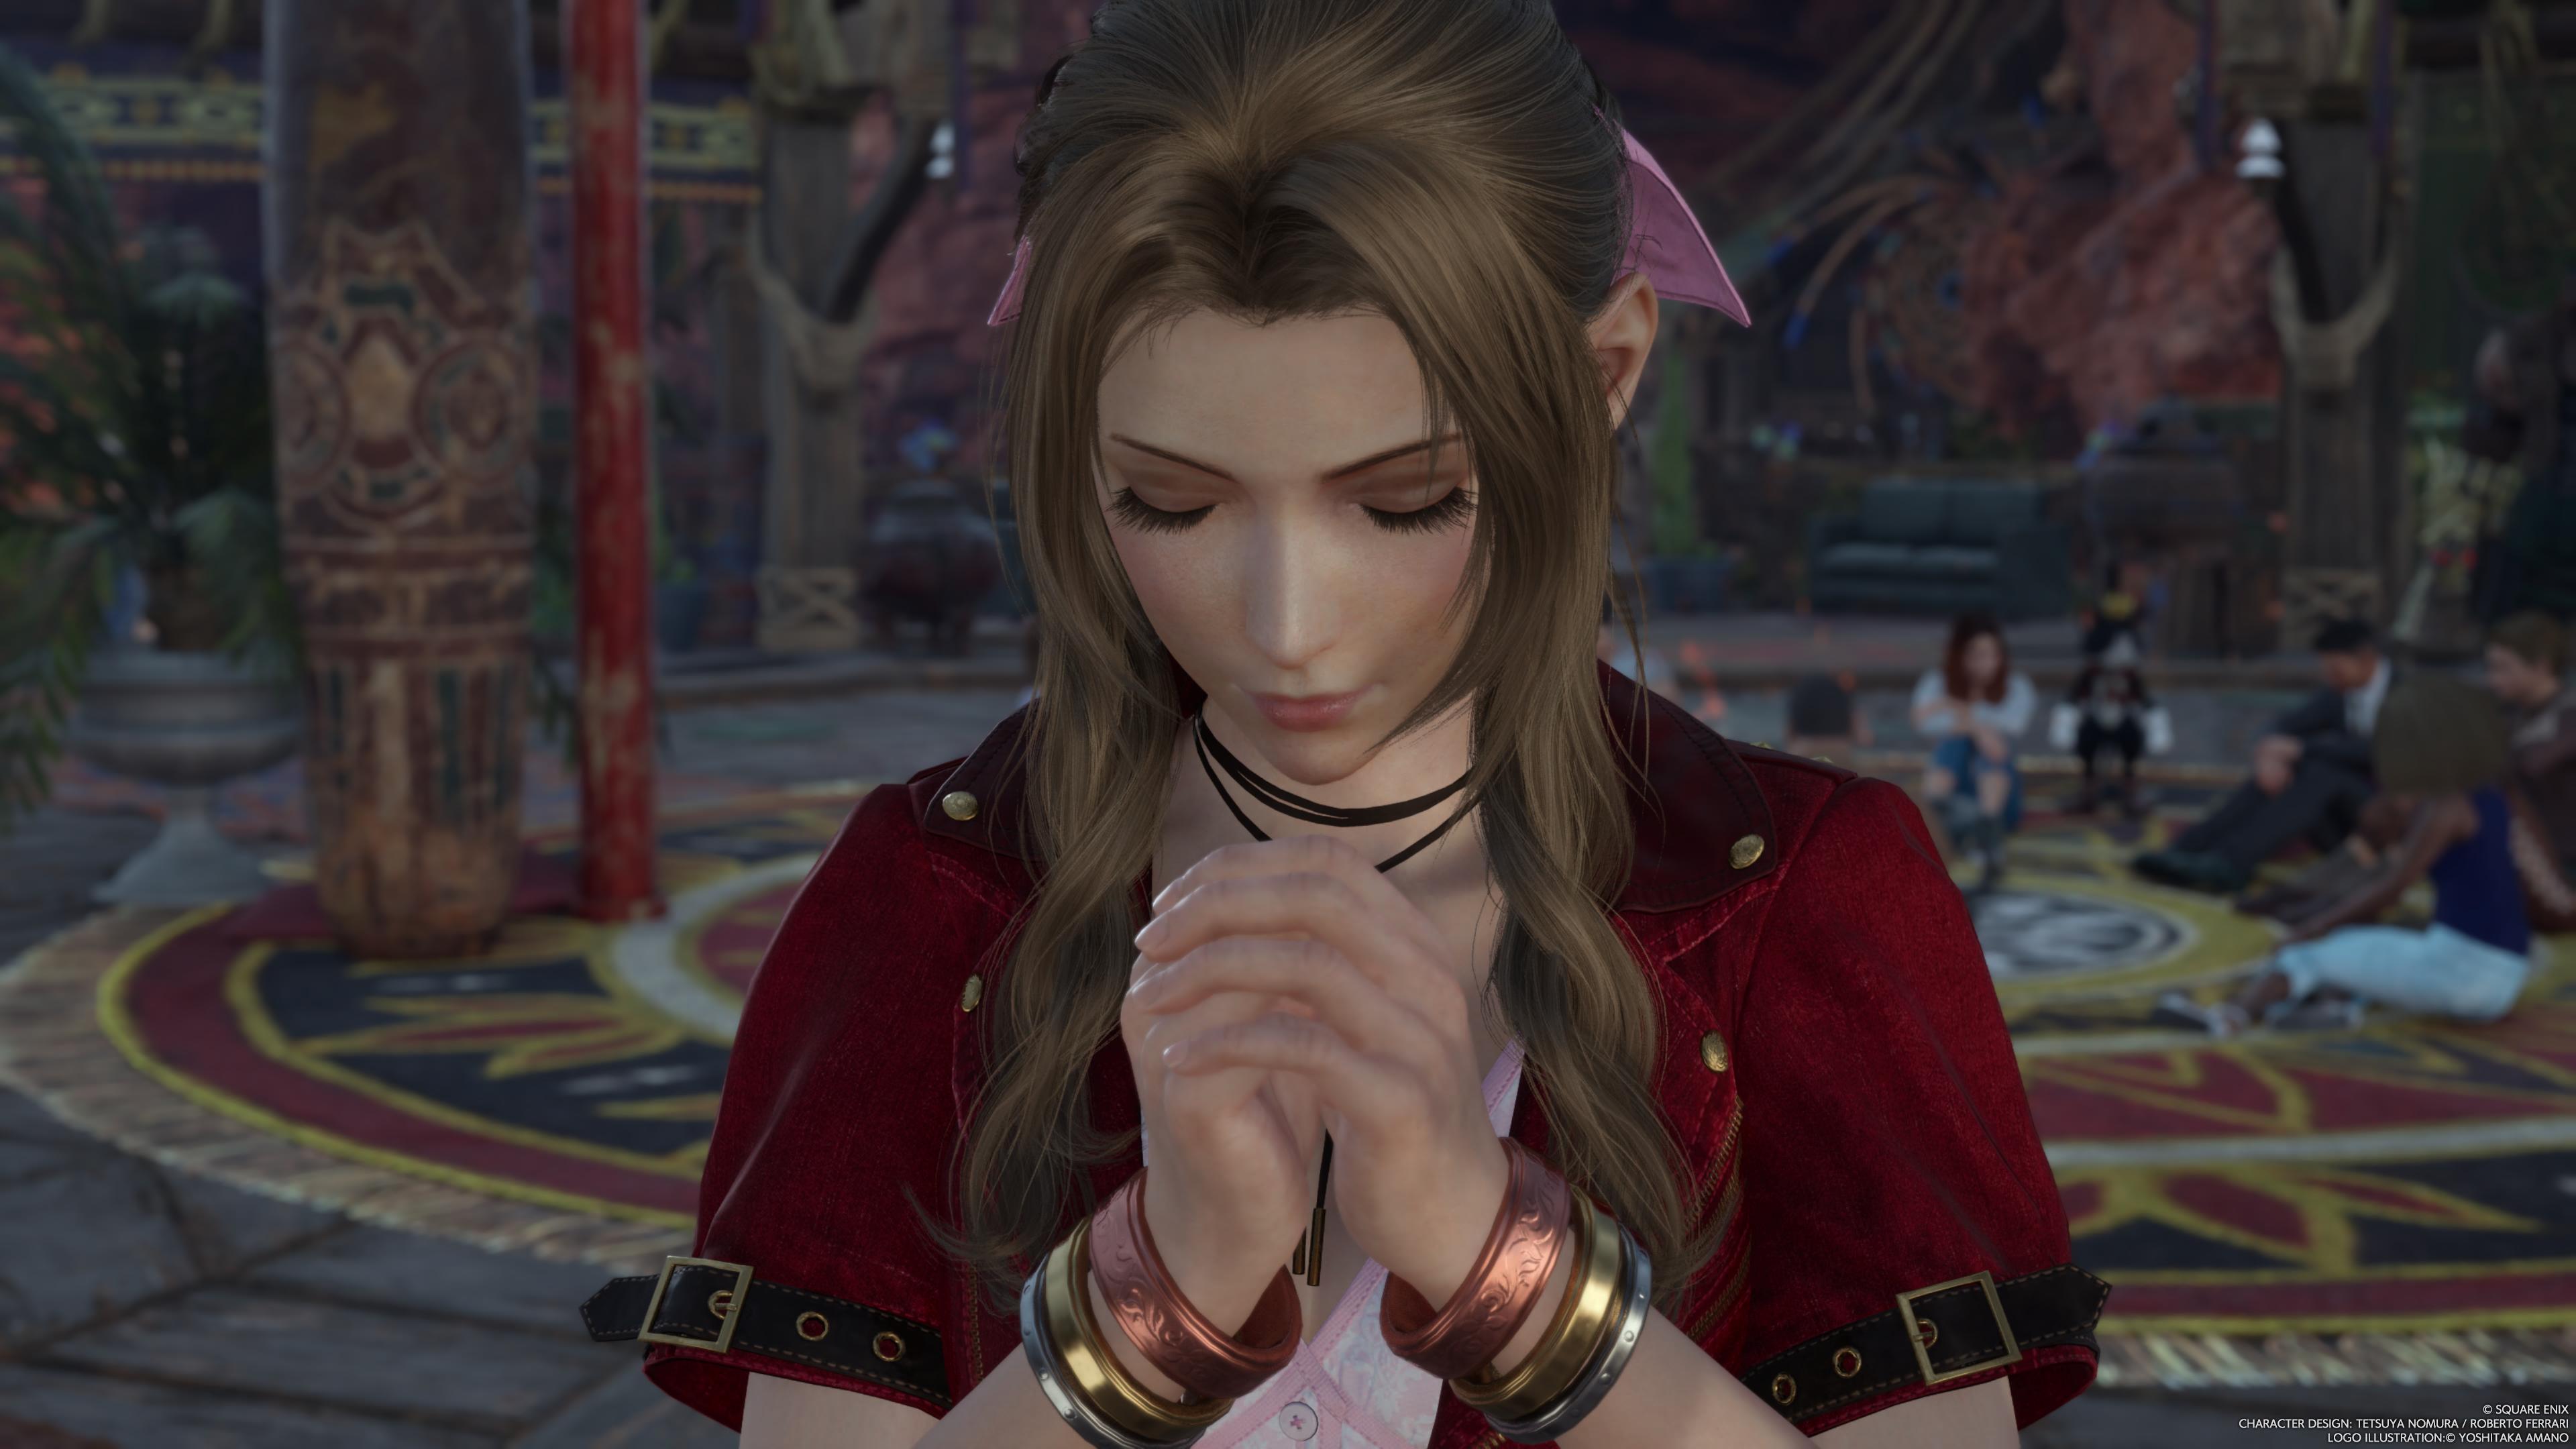 General 3840x2160 Final Fantasy VII: Rebirth Aerith Gainsborough Final Fantasy video games video game girls JRPGs Square Enix long hair video game characters CGI closed mouth closed eyes brunette praying bracelets watermarked Yoshitaka Amano face video game art screen shot blurry background fingers